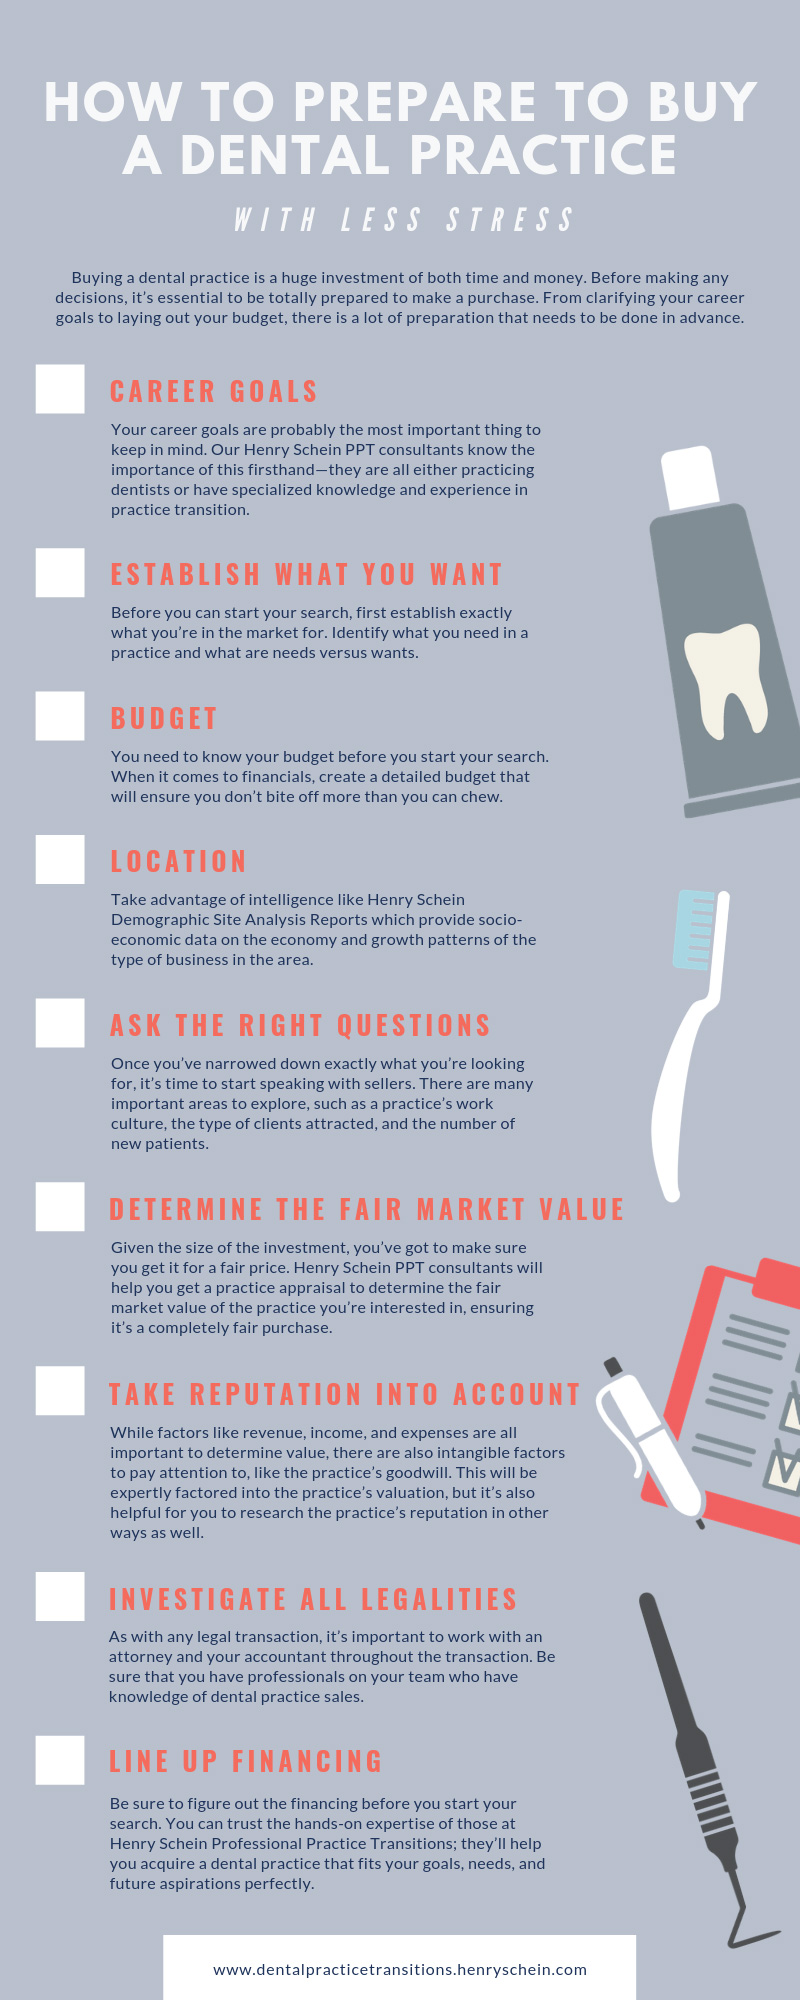 How to Prepare to Buy a Dental Practice With Less Stress infographic